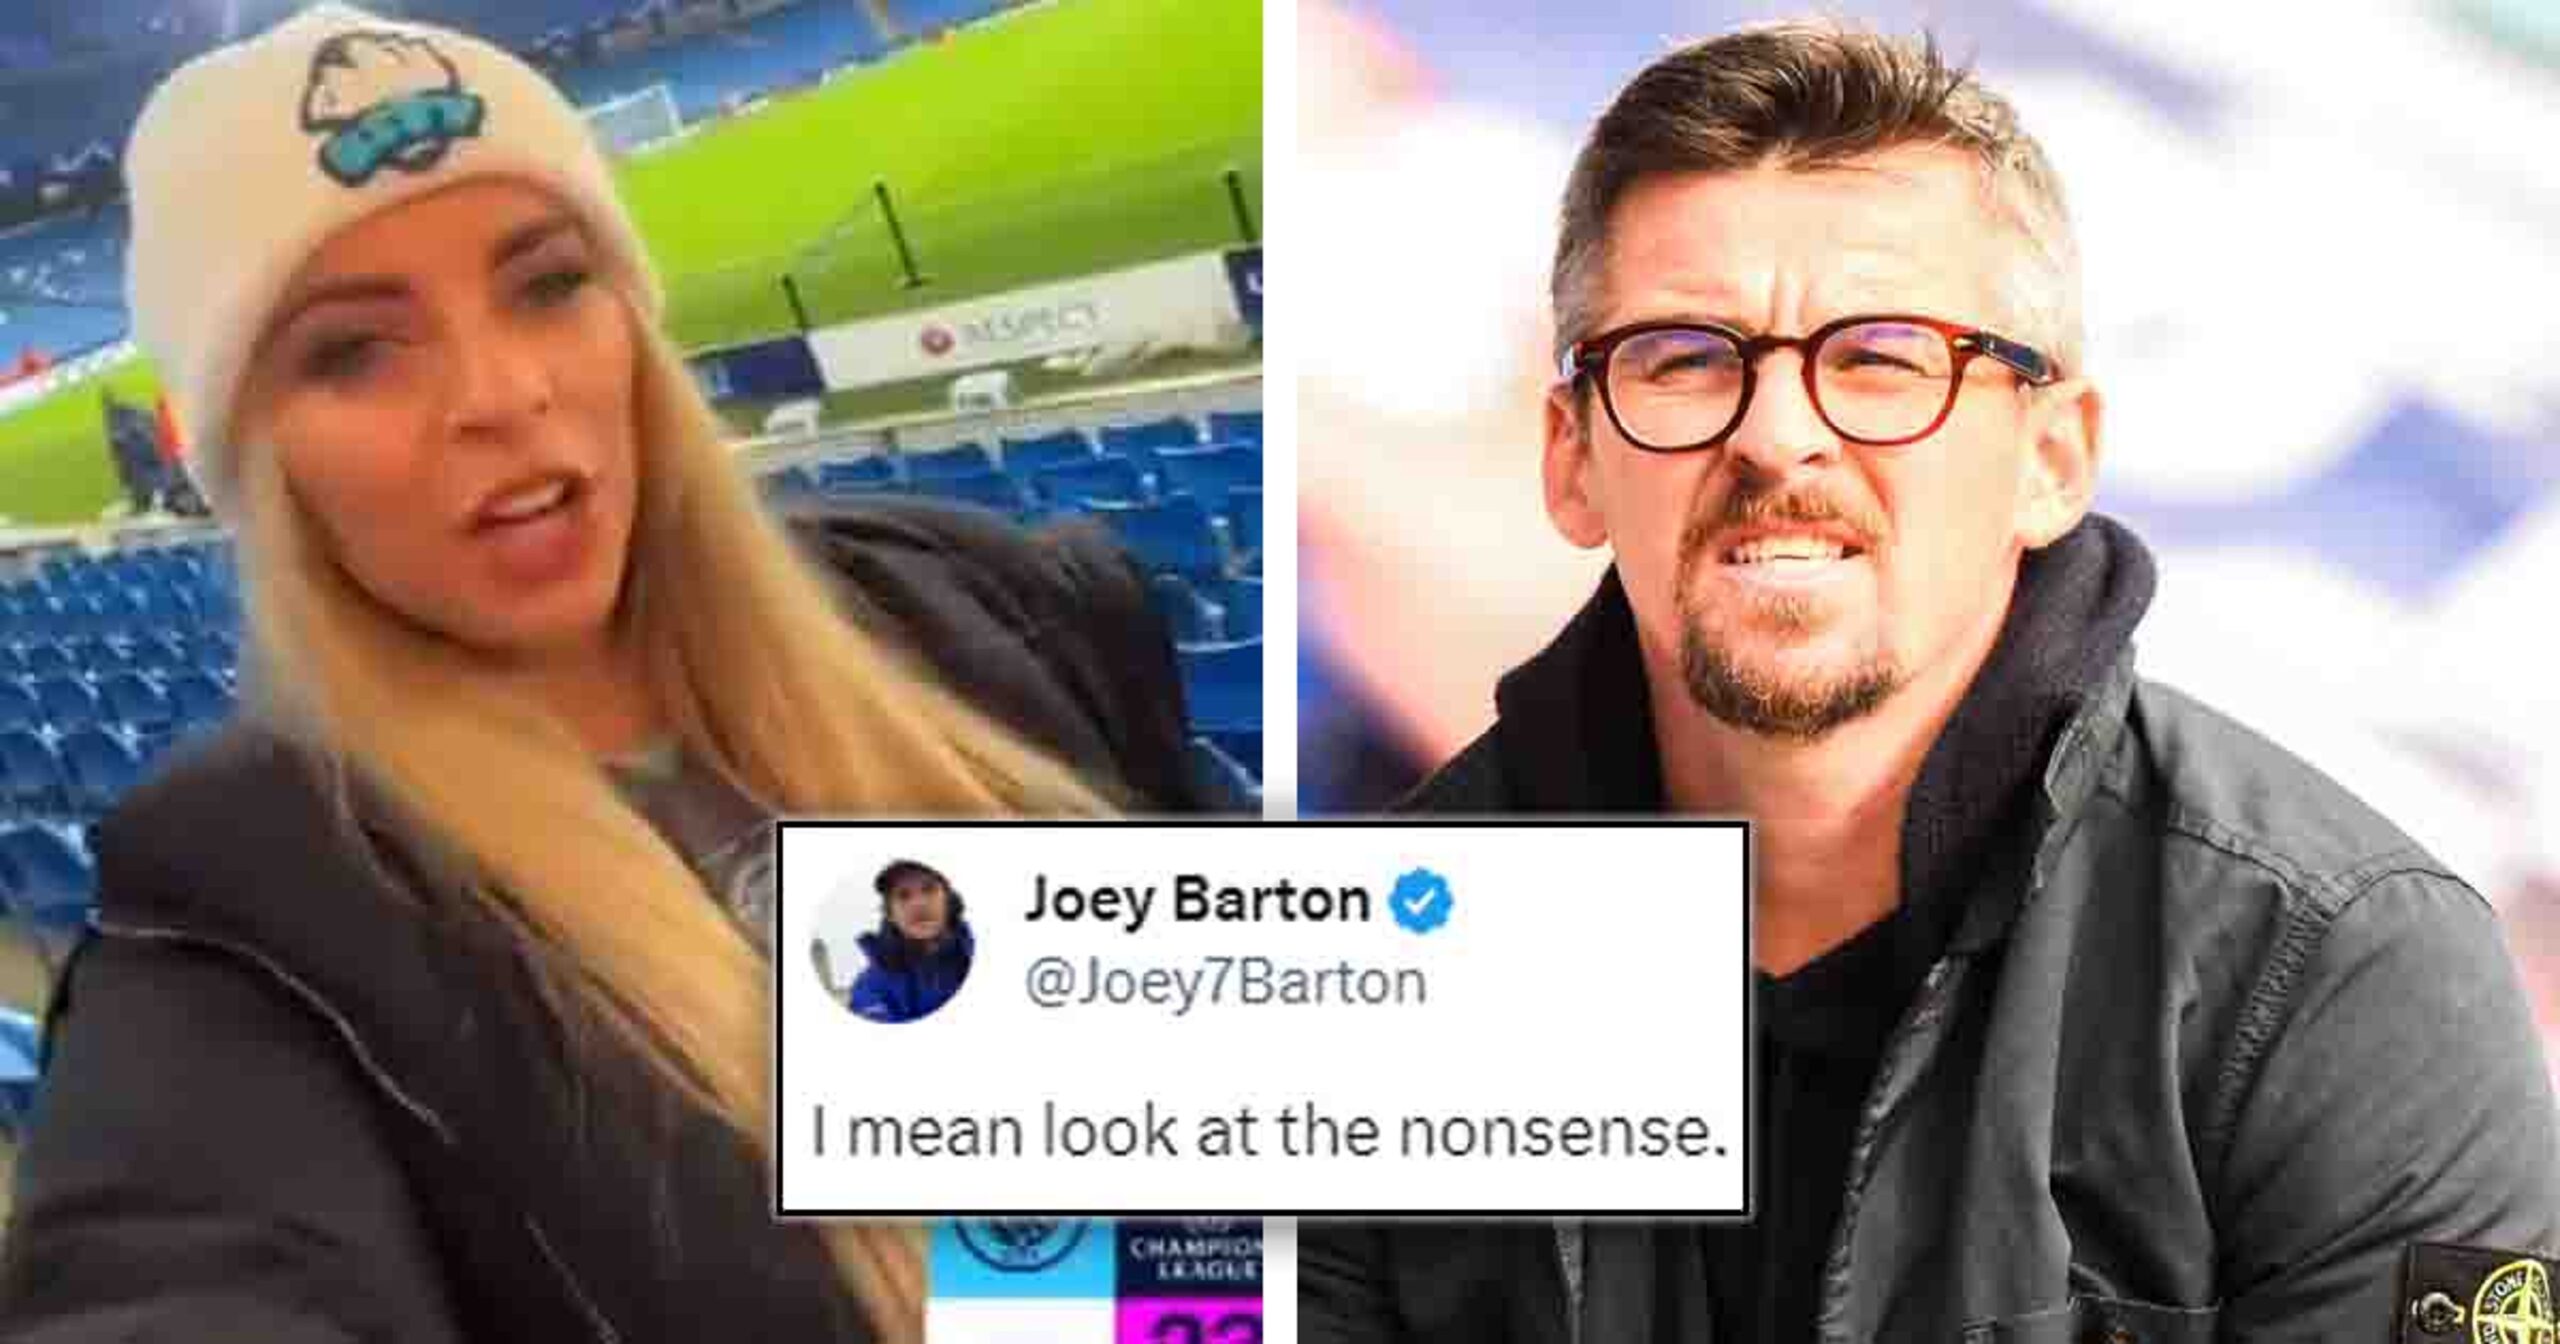 Laura Woods, Emma Louis Jones And More: Women Of Football Hit Back At Sexist Remarks From Joey Barton